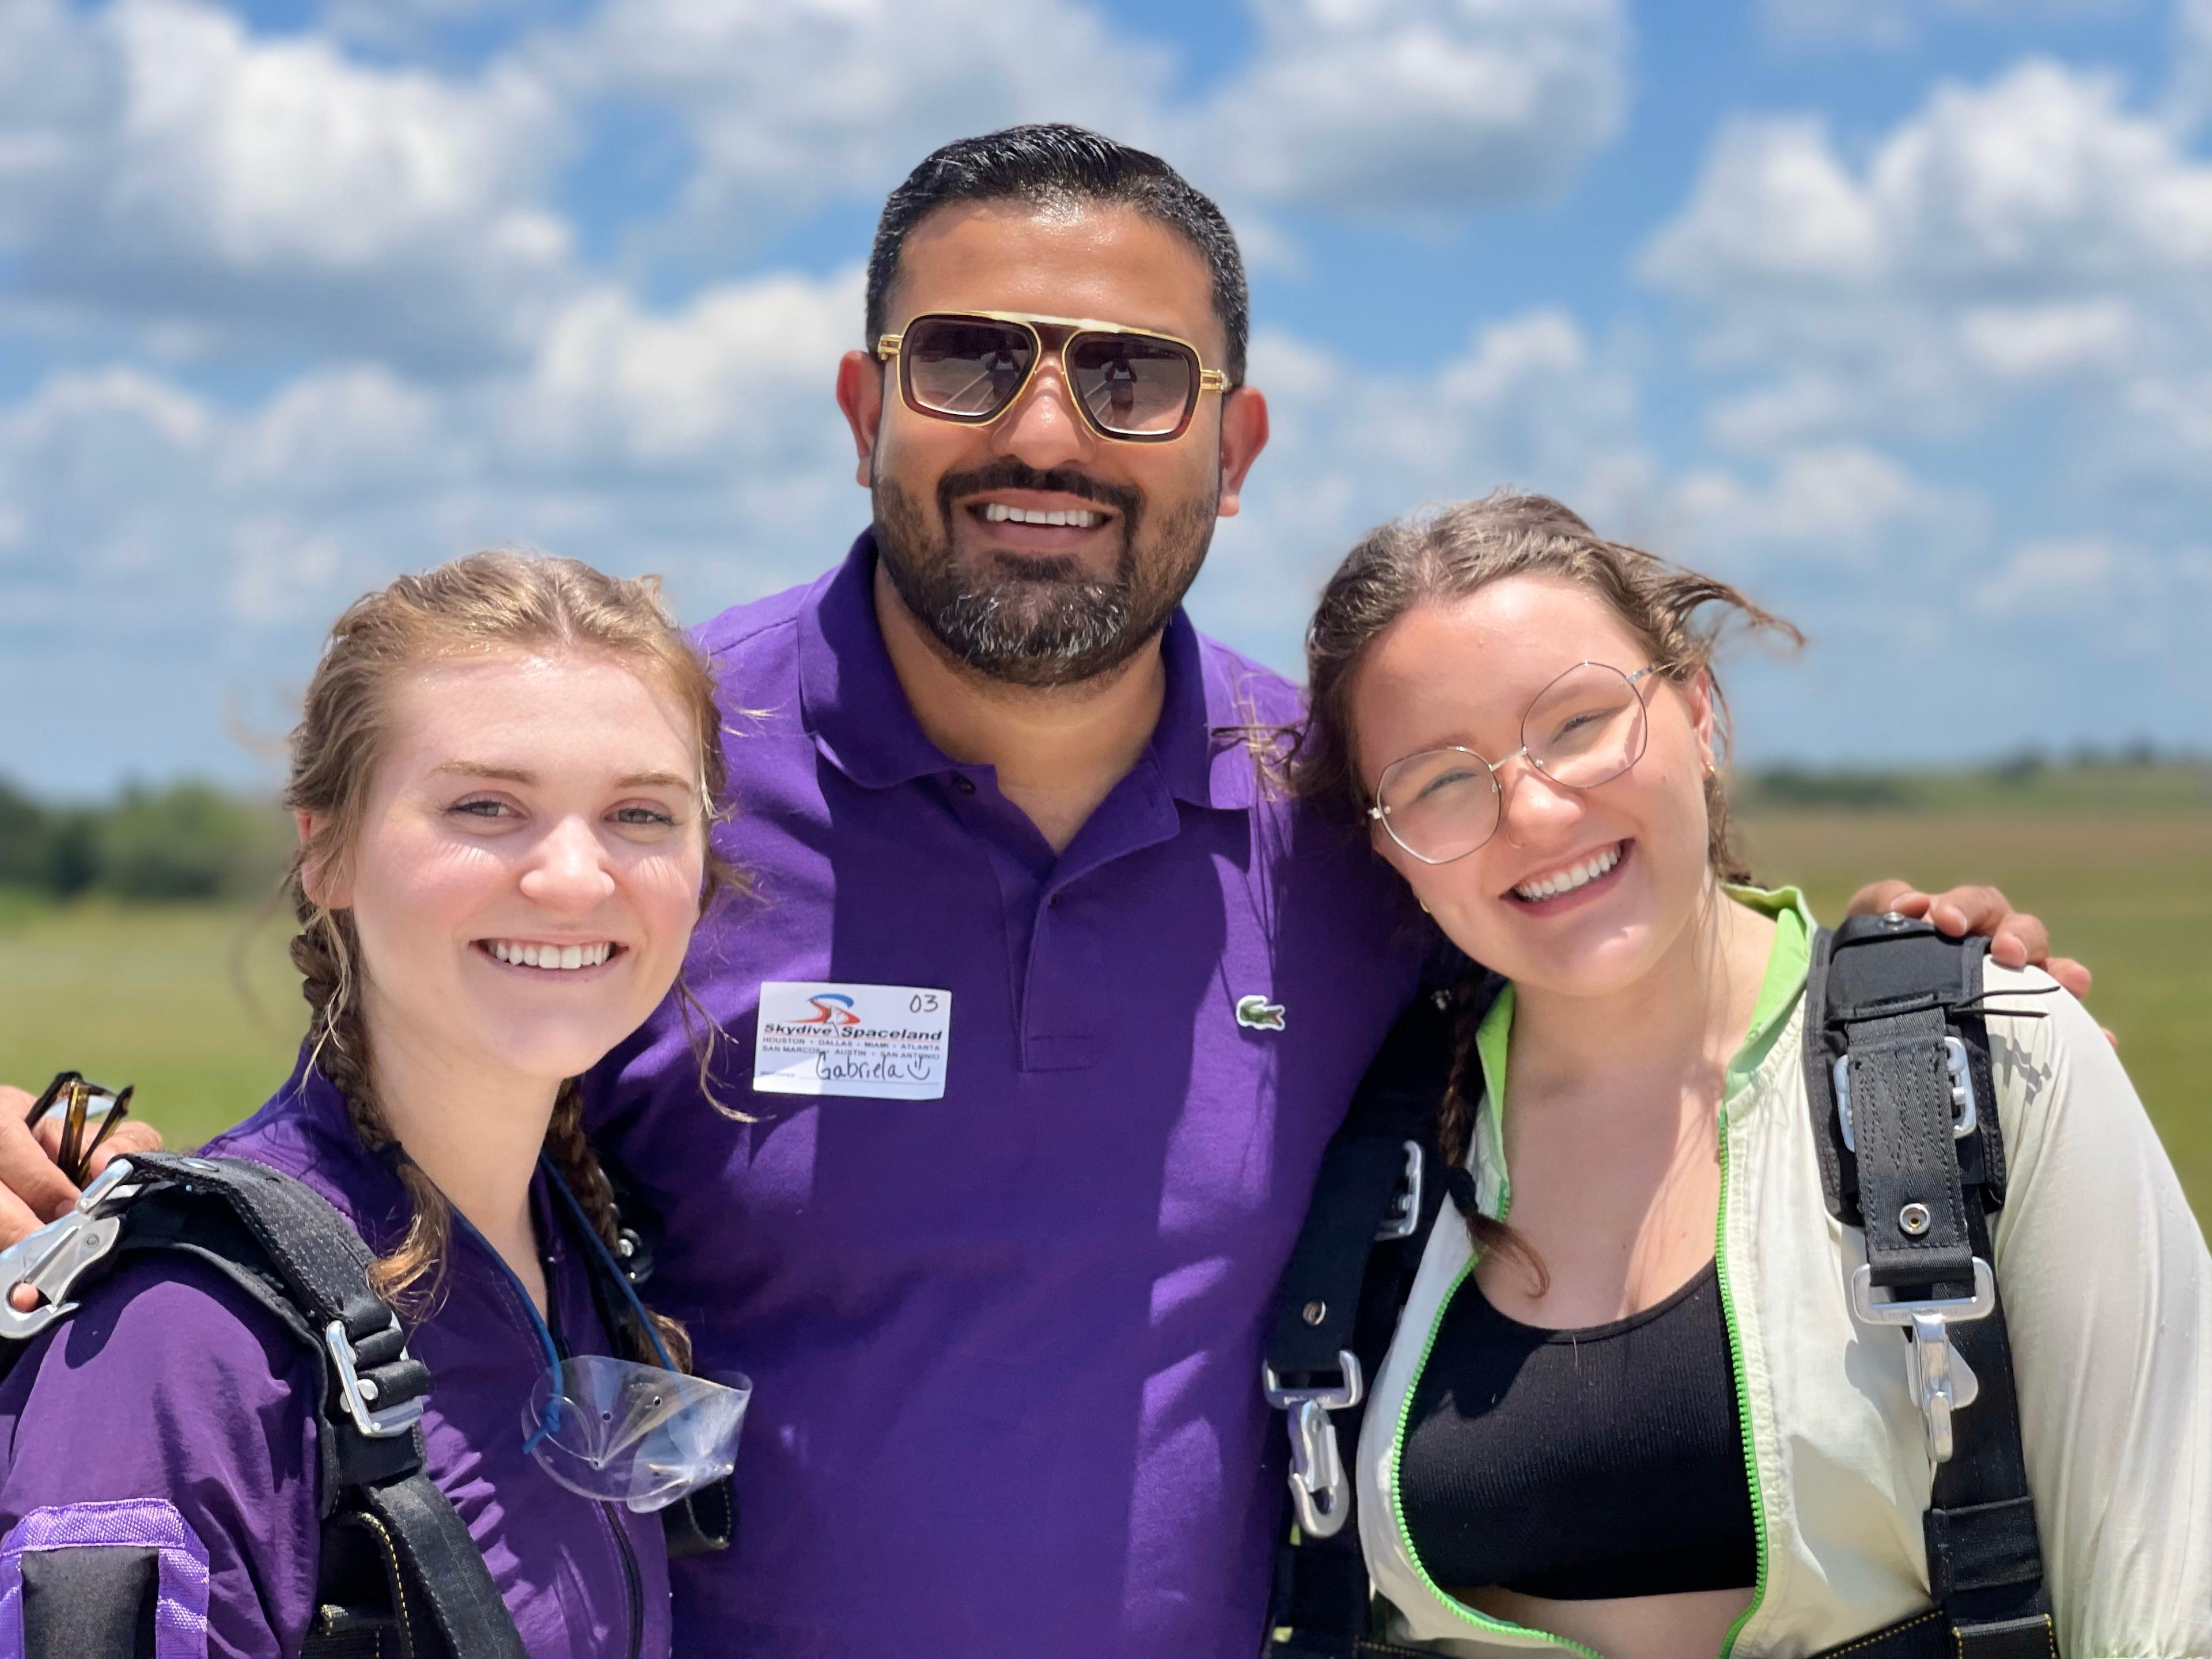 Members of the Digilatics team at a skydiving event.